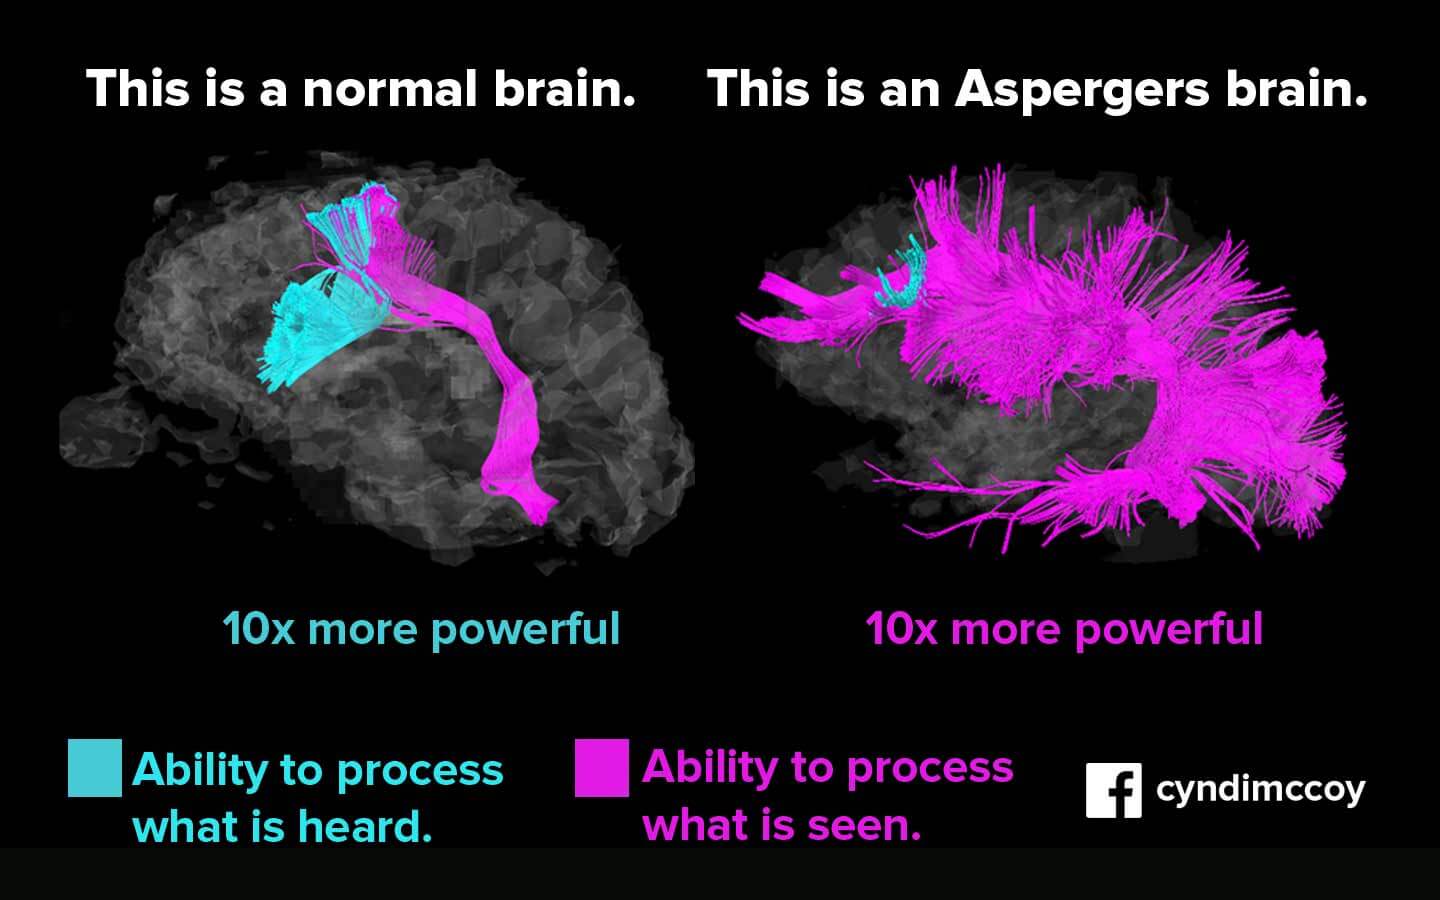 new-what-is-aspergers-syndrome-everything-you-need-to-know-1_pk8l.jpg